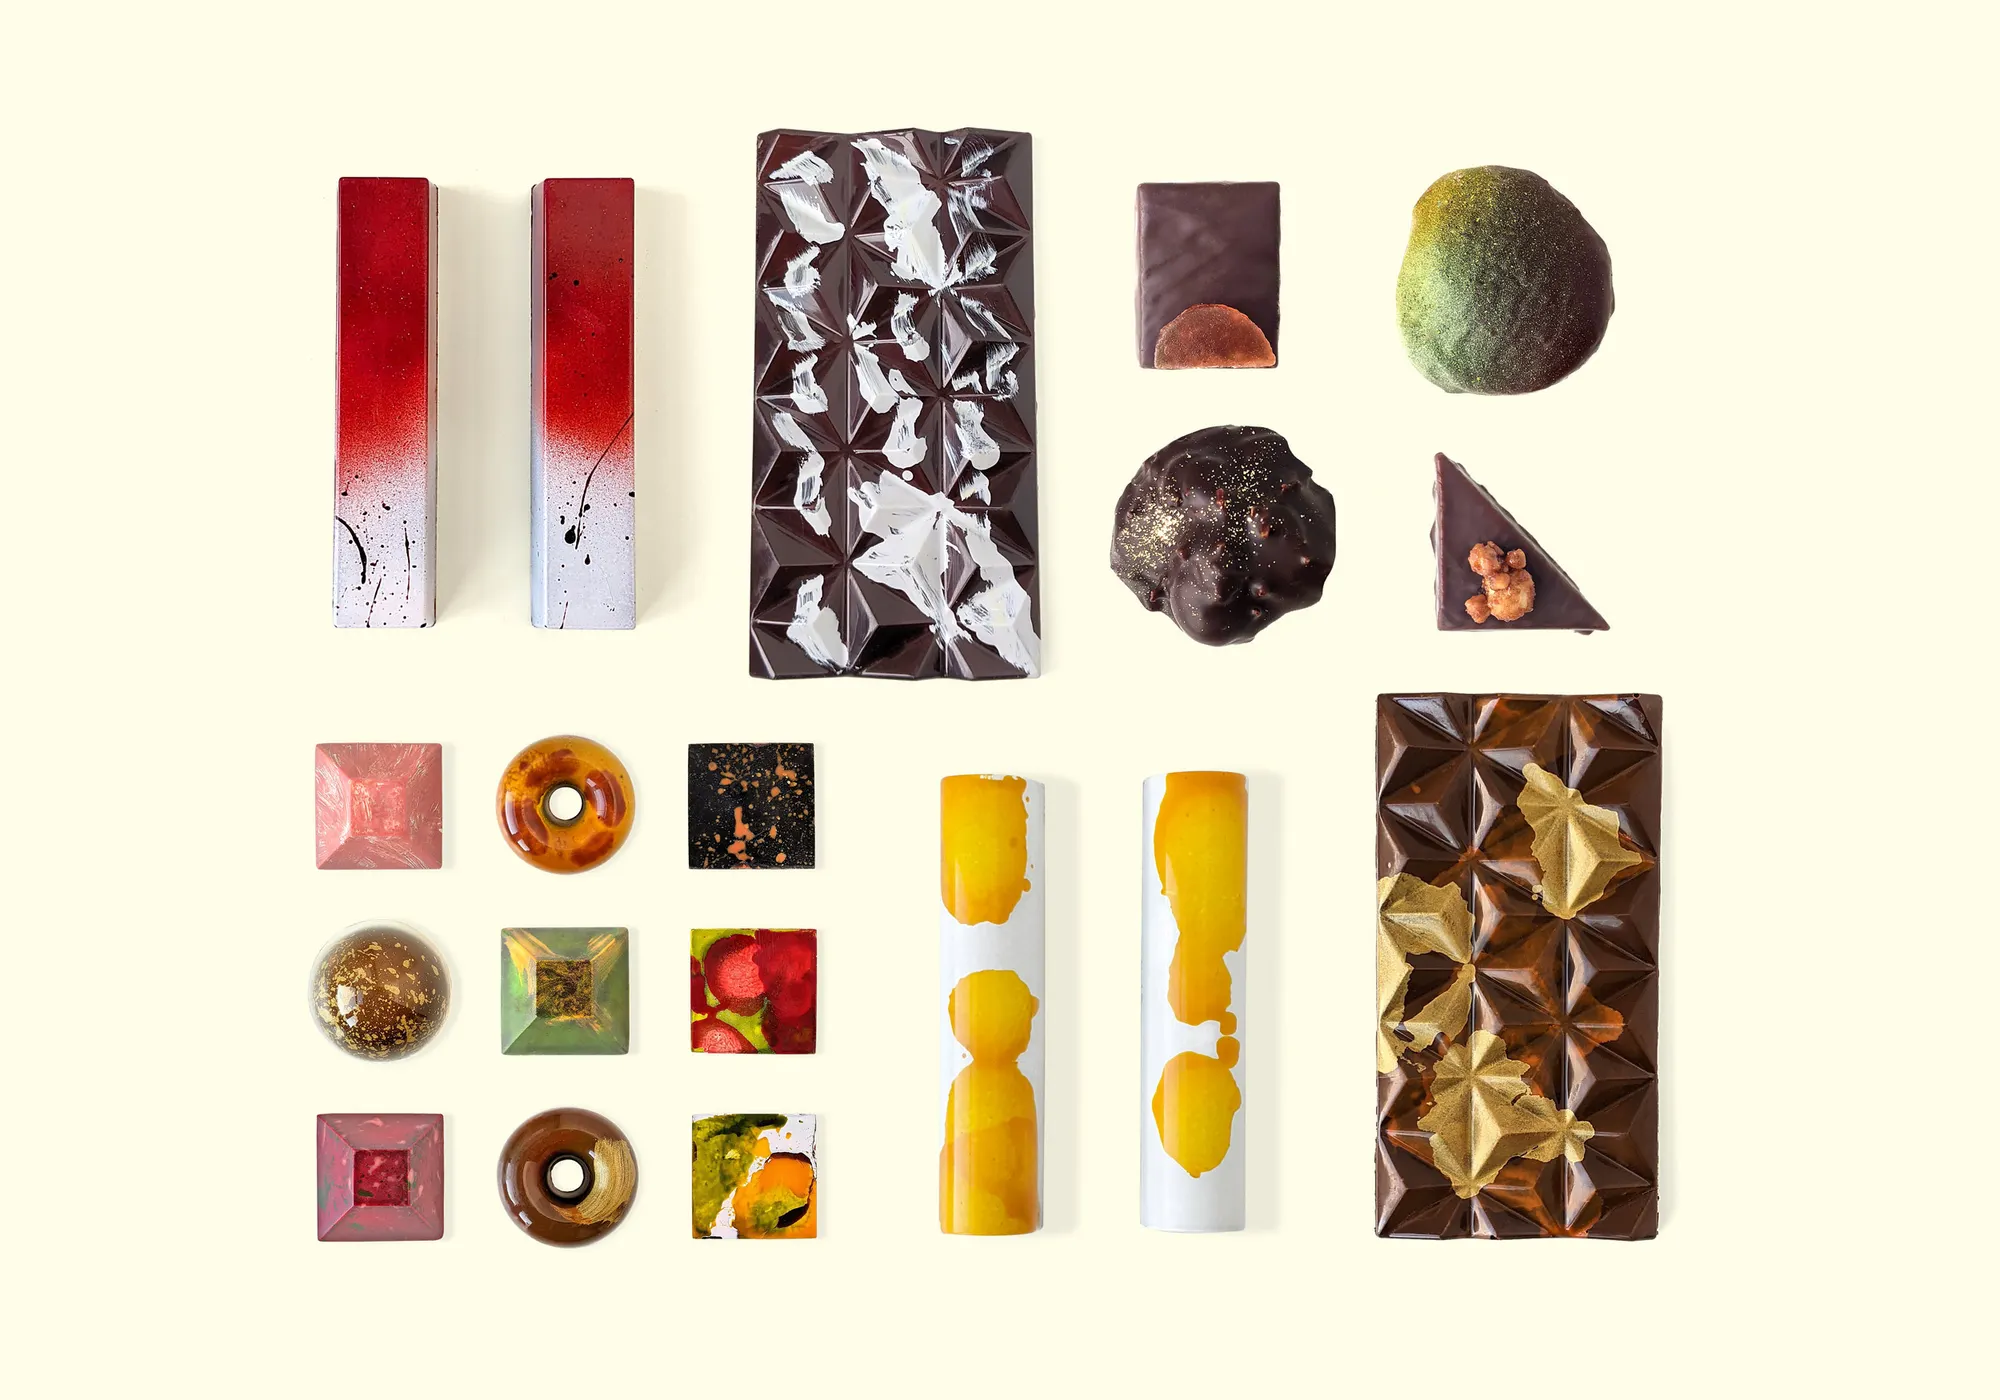 A photograph of two rows of artfully arranged chocolates and chocolate bars.